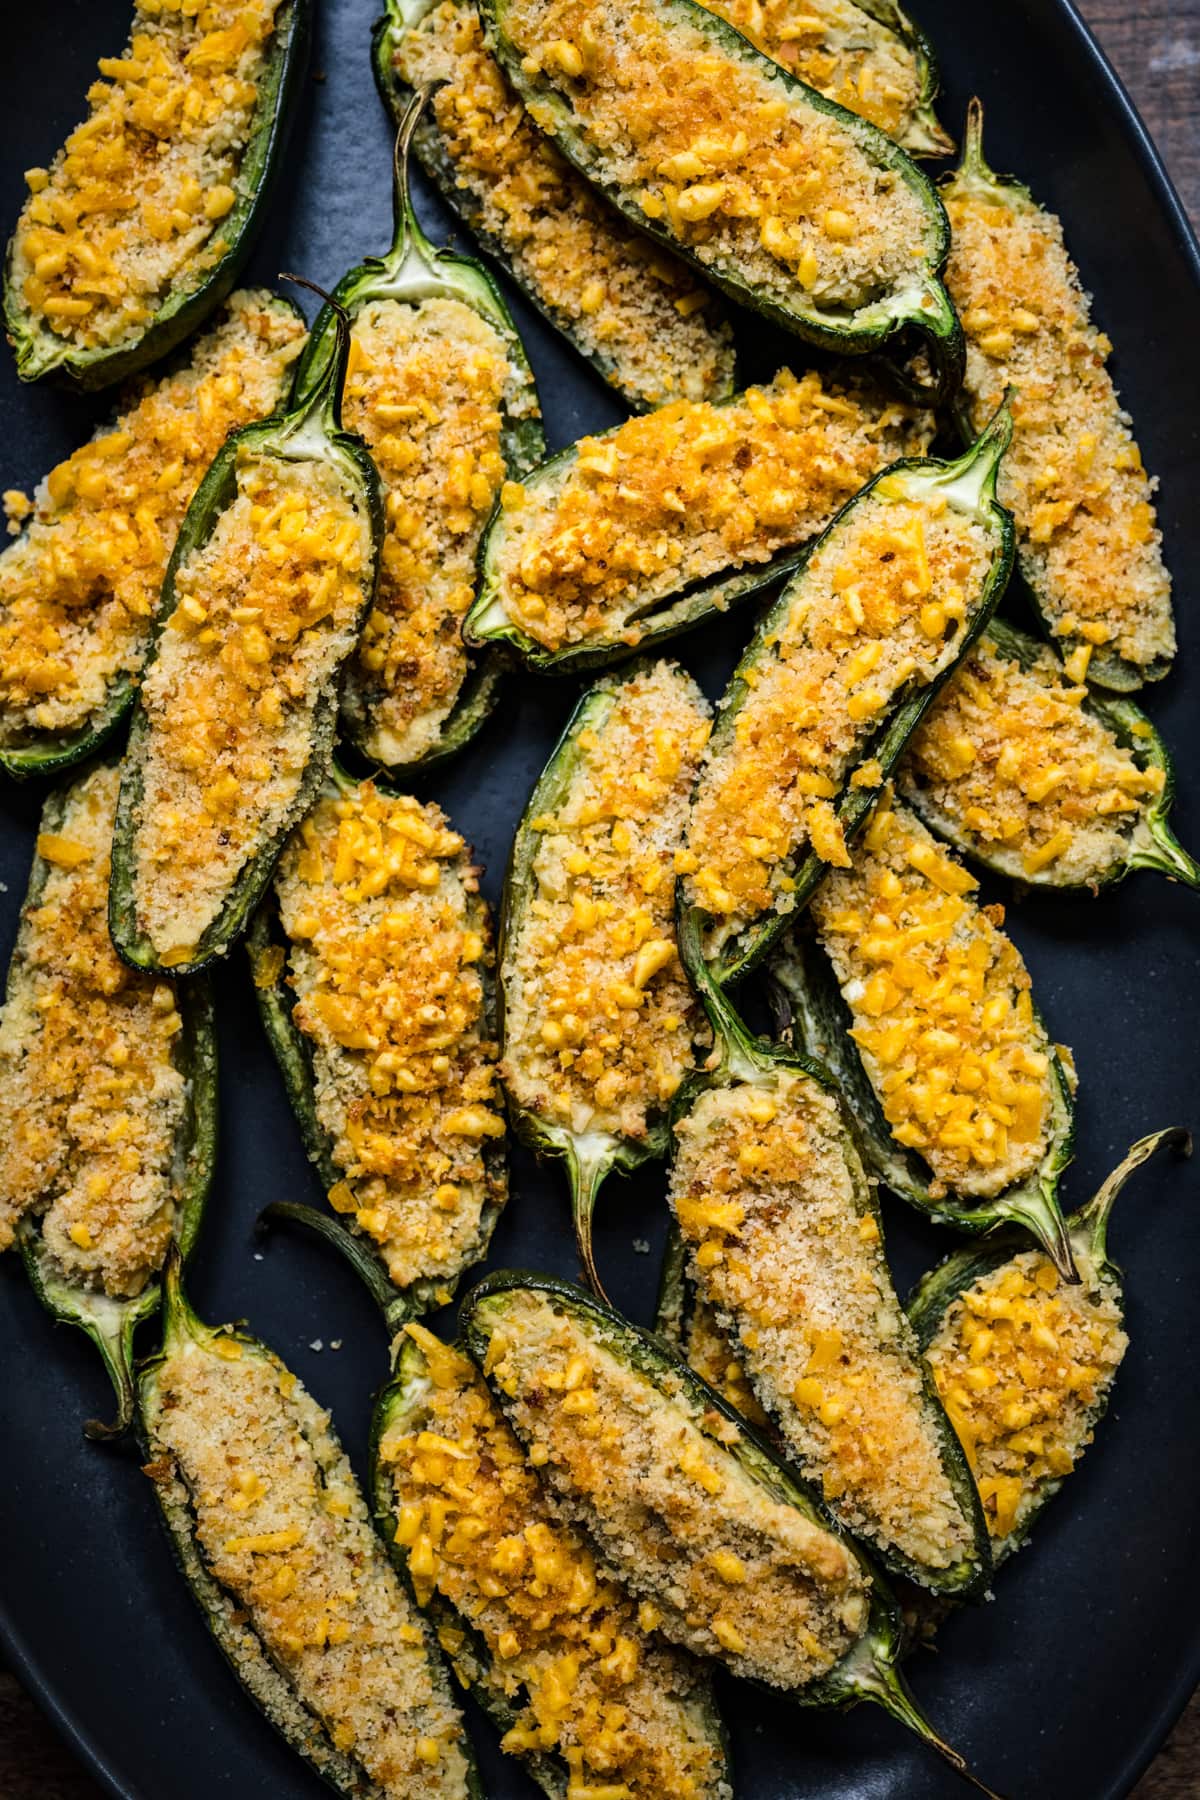 Overhead view of jalapeño poppers on a sheet pan.